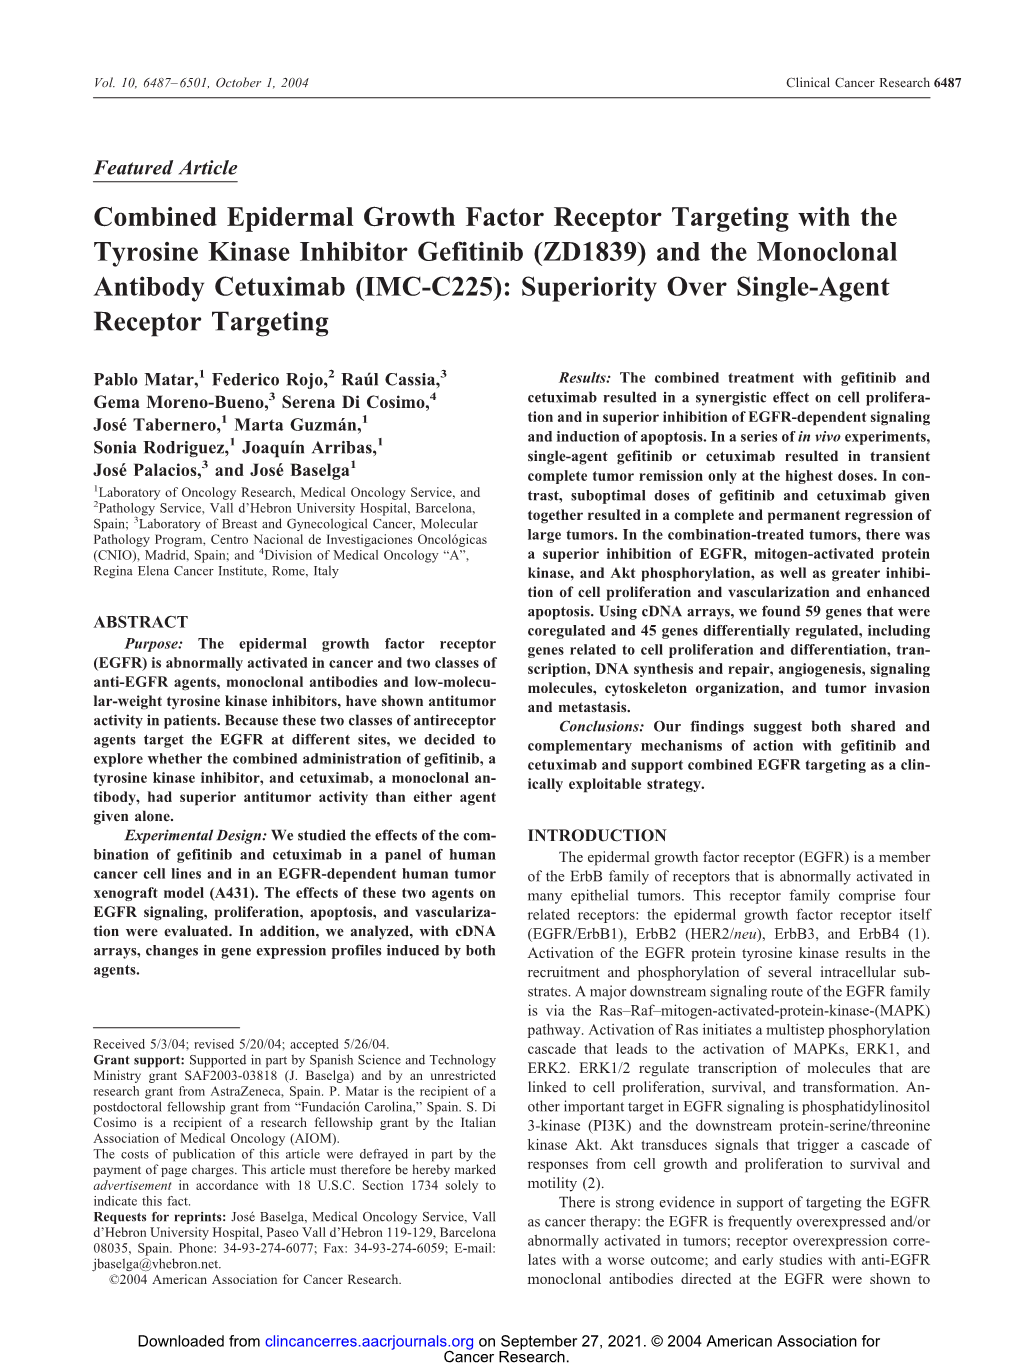 Combined Epidermal Growth Factor